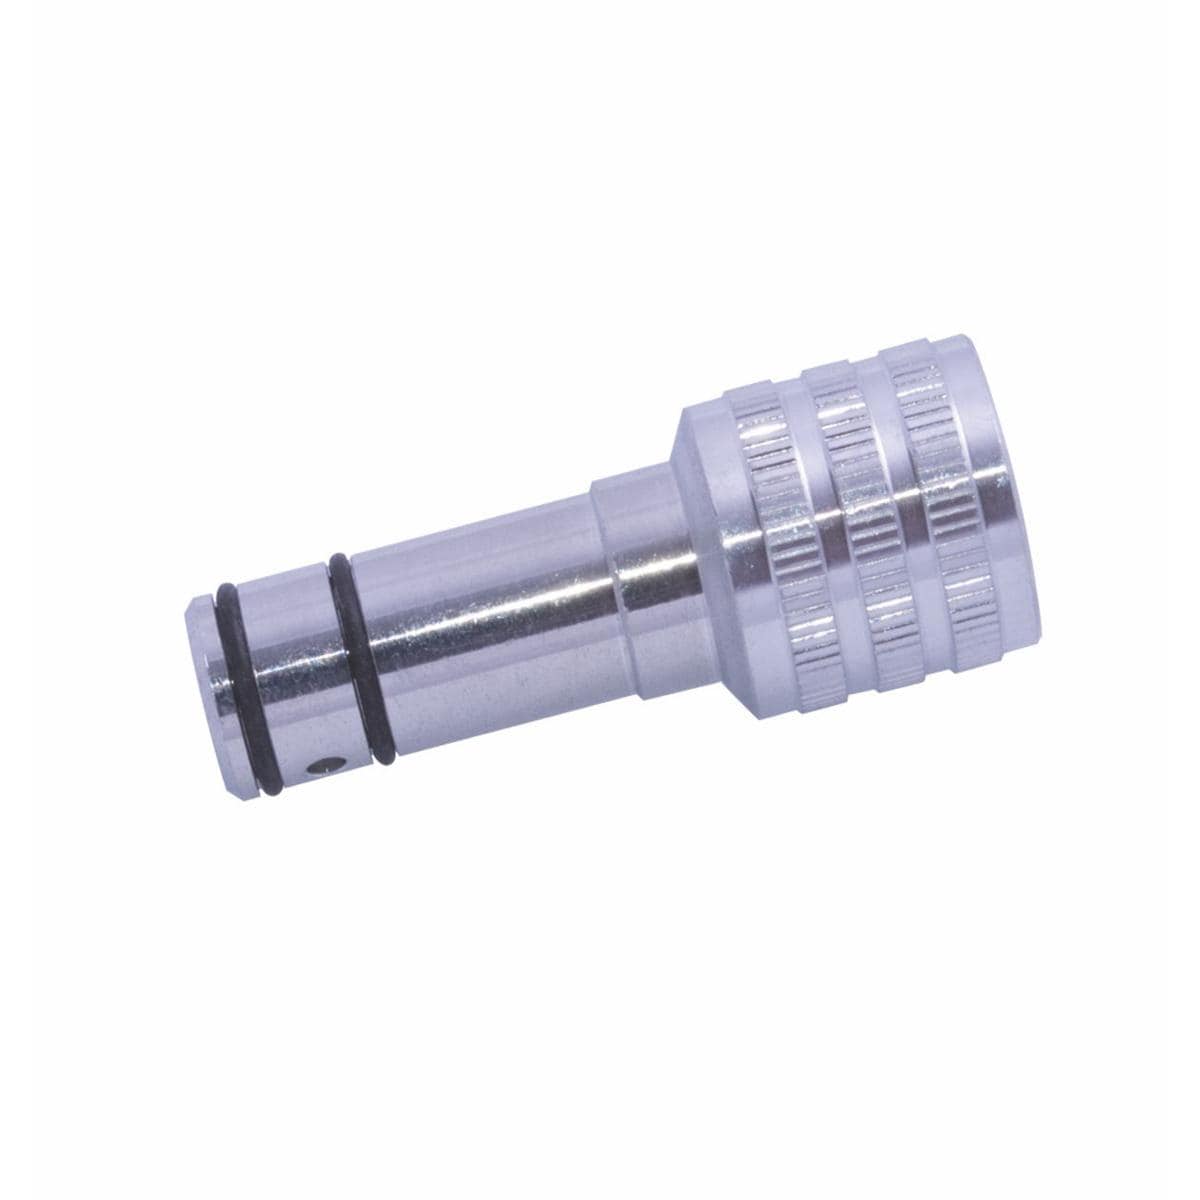 Oil Spray Nozzle For Sirona Type Handpieces